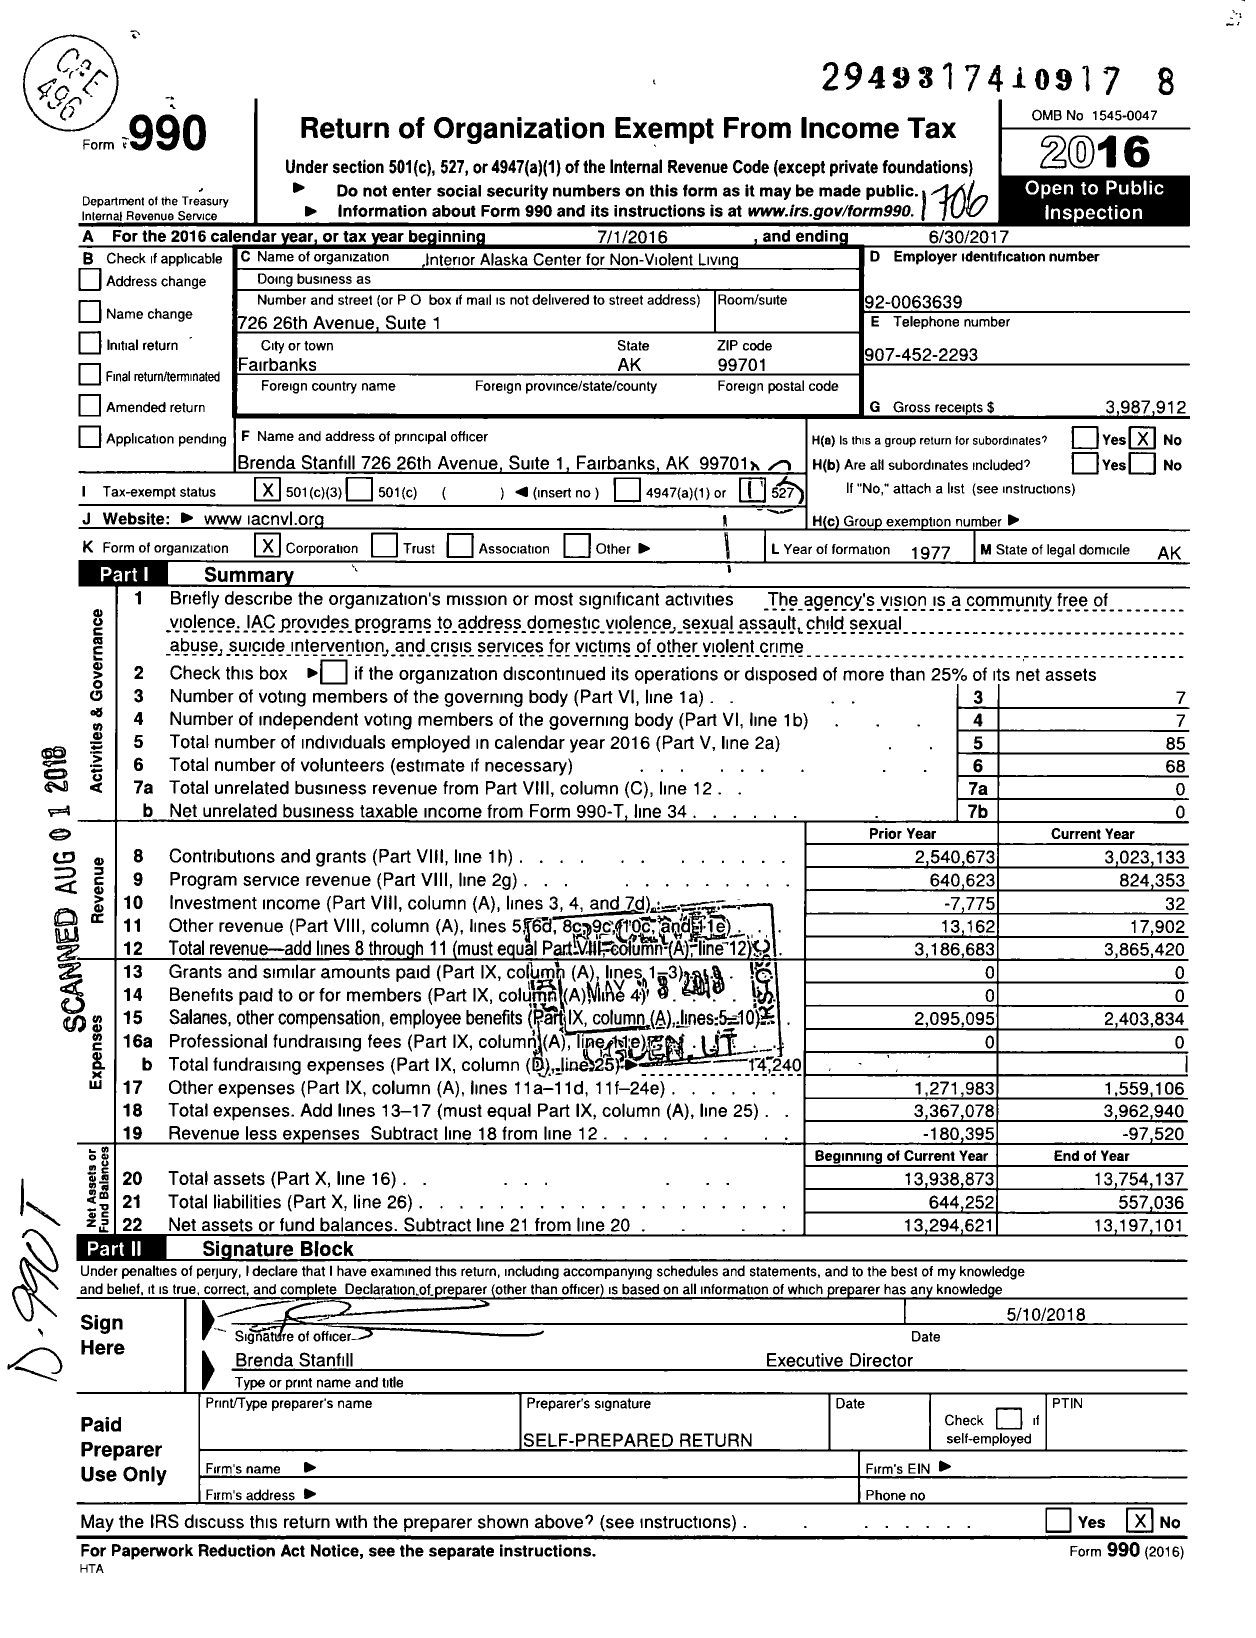 Image of first page of 2016 Form 990 for Interior Alaska Center for Non-Violent Living (IAC)